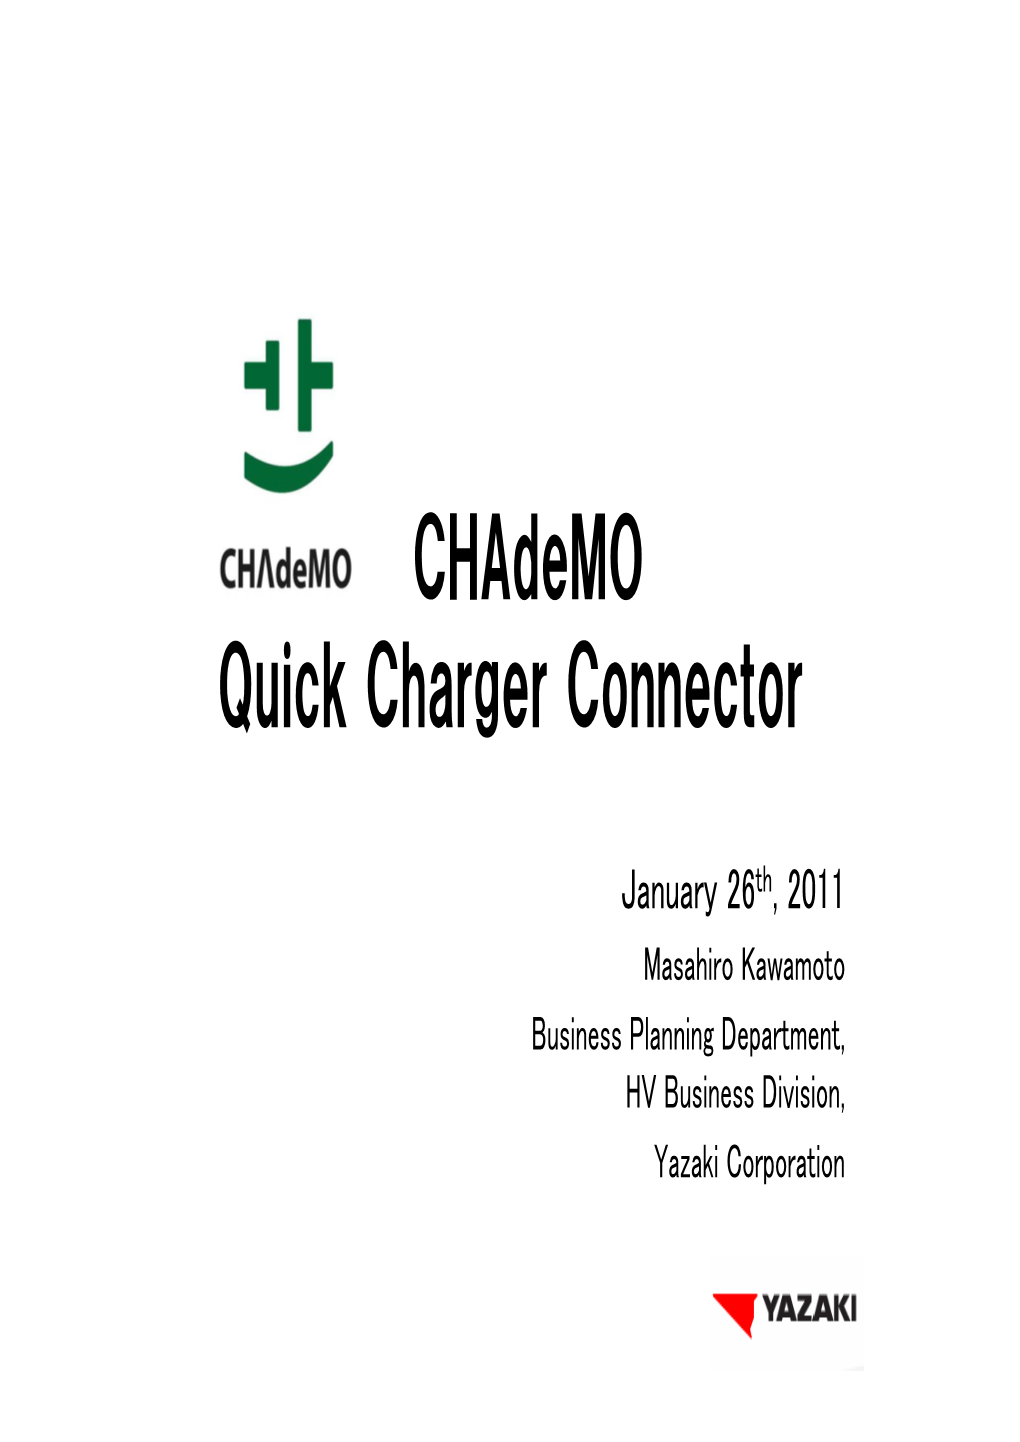 Chademo Quick Charger Connector